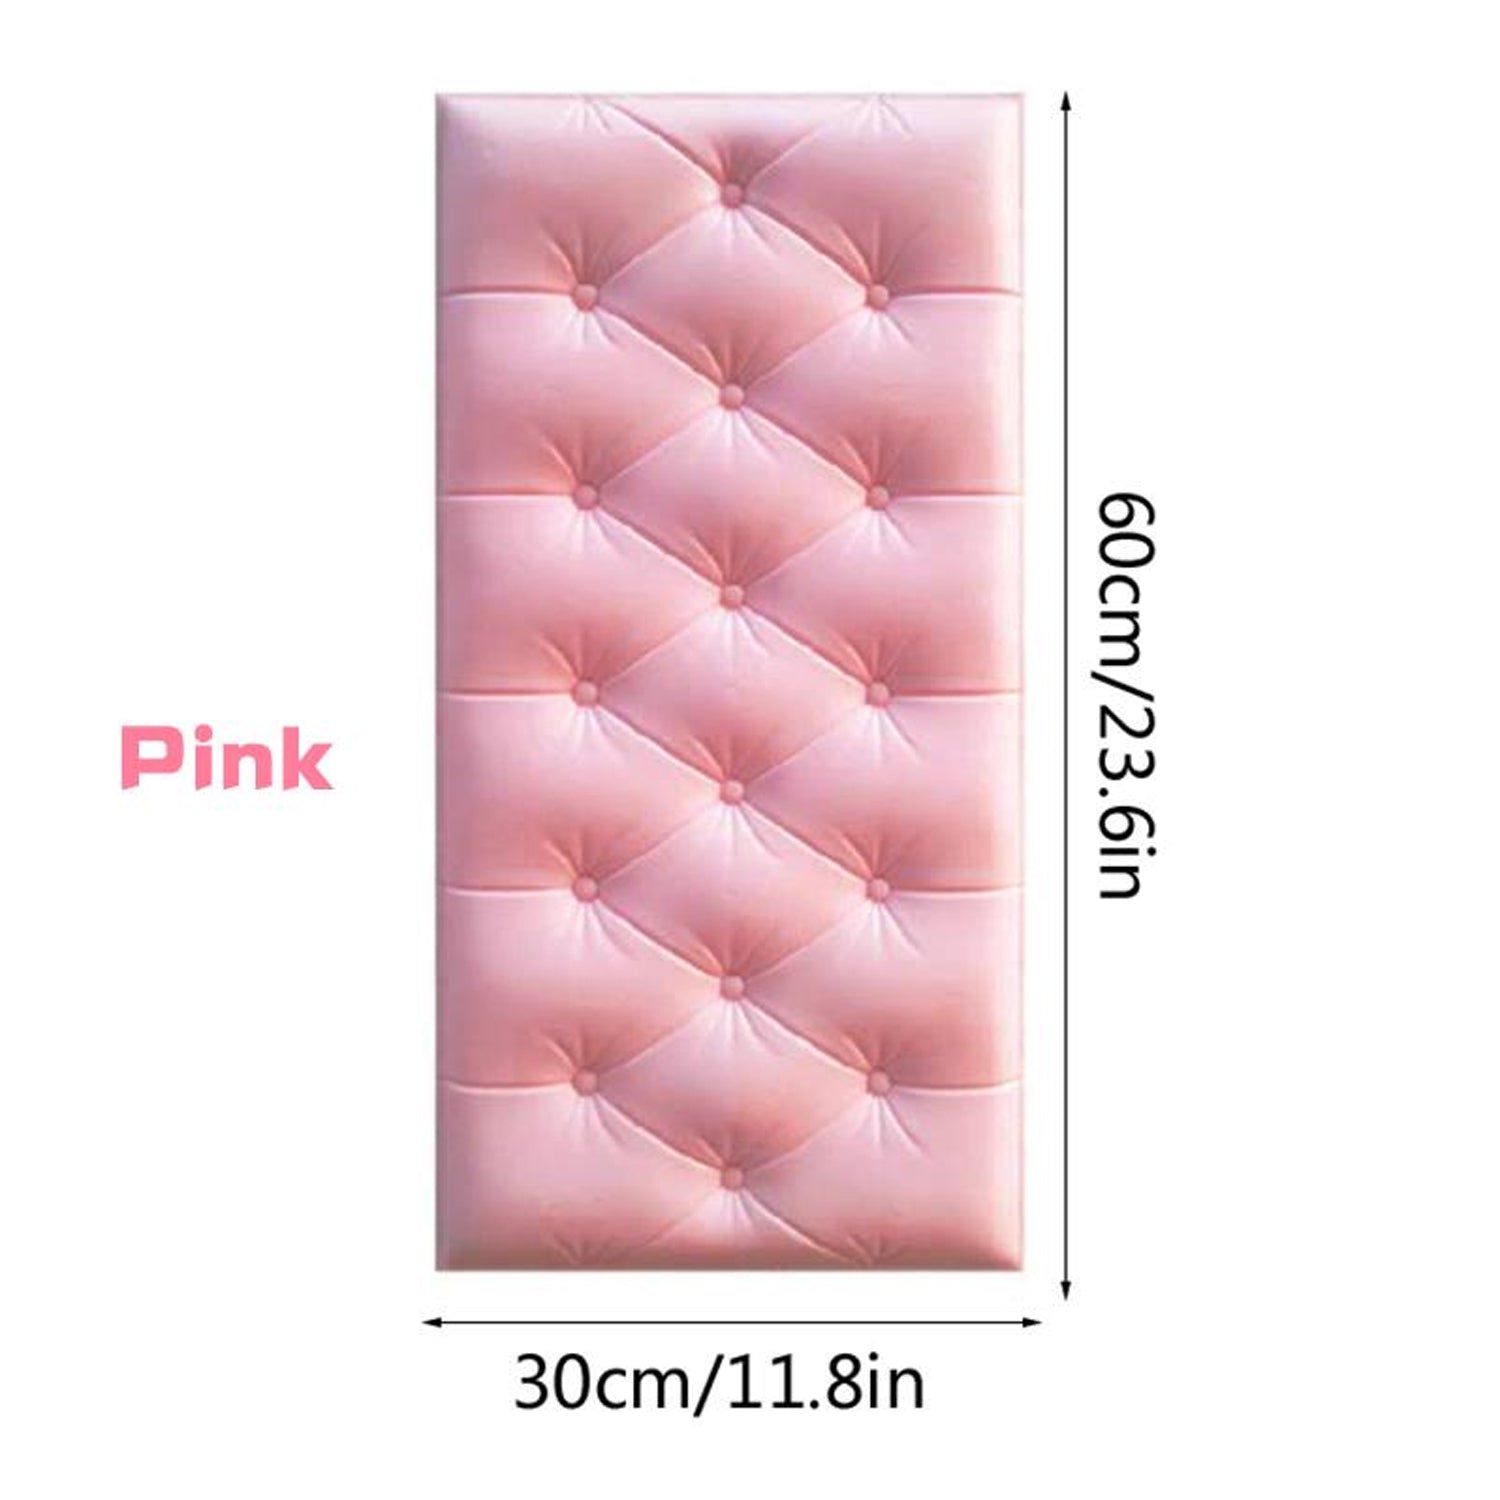 9039 Pink 3D Adhesive wallpaper for  living Room. Room Wall Paper Home Decor Self Adhesive Wallpaper 